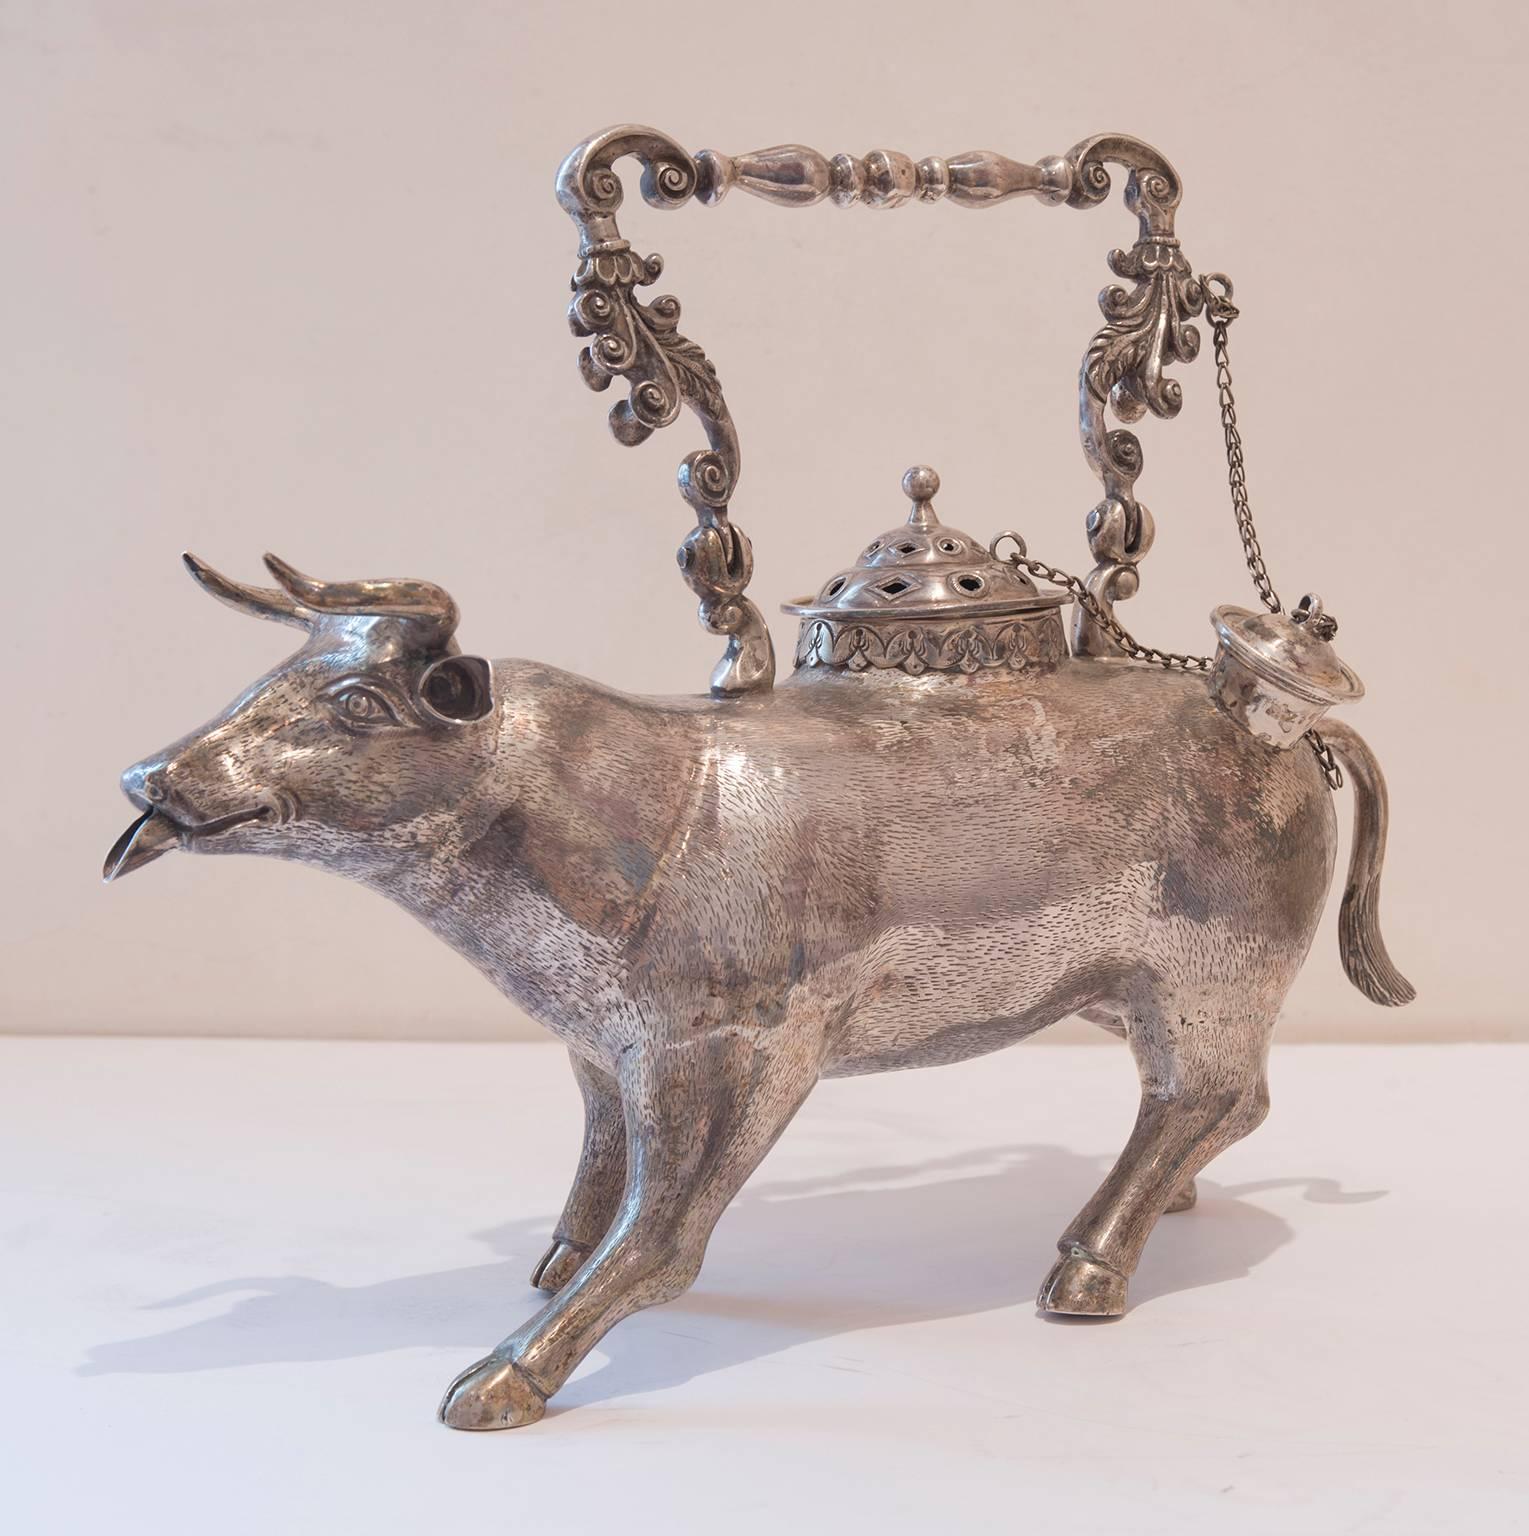 Large continental cow form aquamanile or warming teapot. Crafted out of sterling silver. Features a well-sculpted hollow body with rare warming area. Round drawer slides out of the side for hot coal placement. Caps attached to chain to fancy handle.